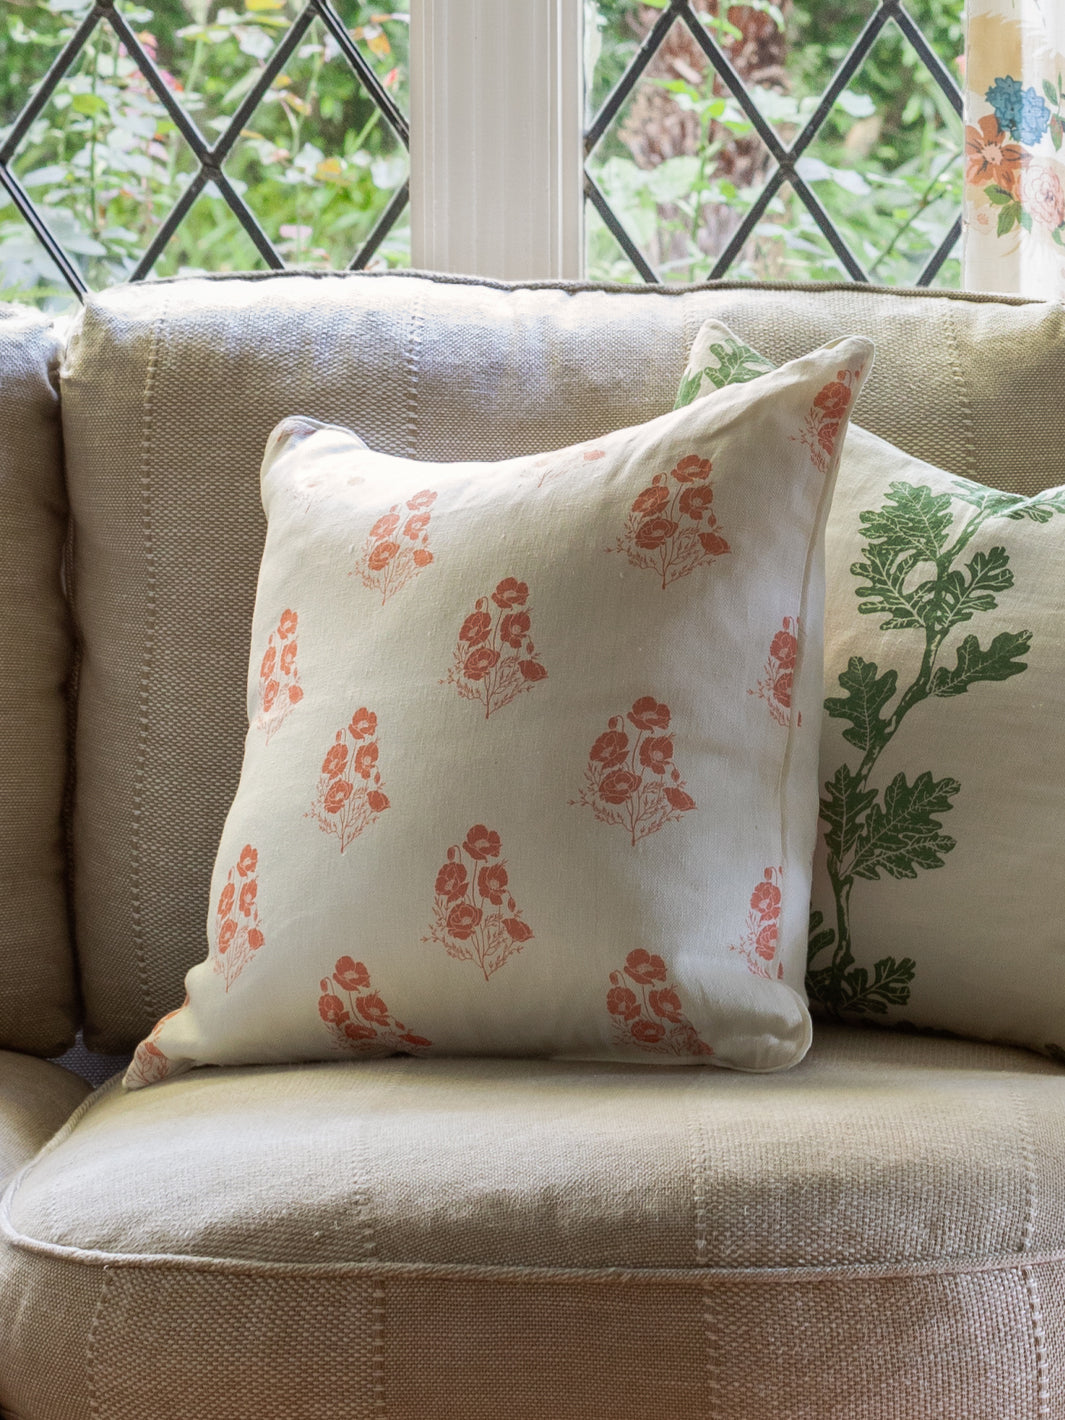 'California Poppy' Linen Fabric by Nathan Turner - Pink